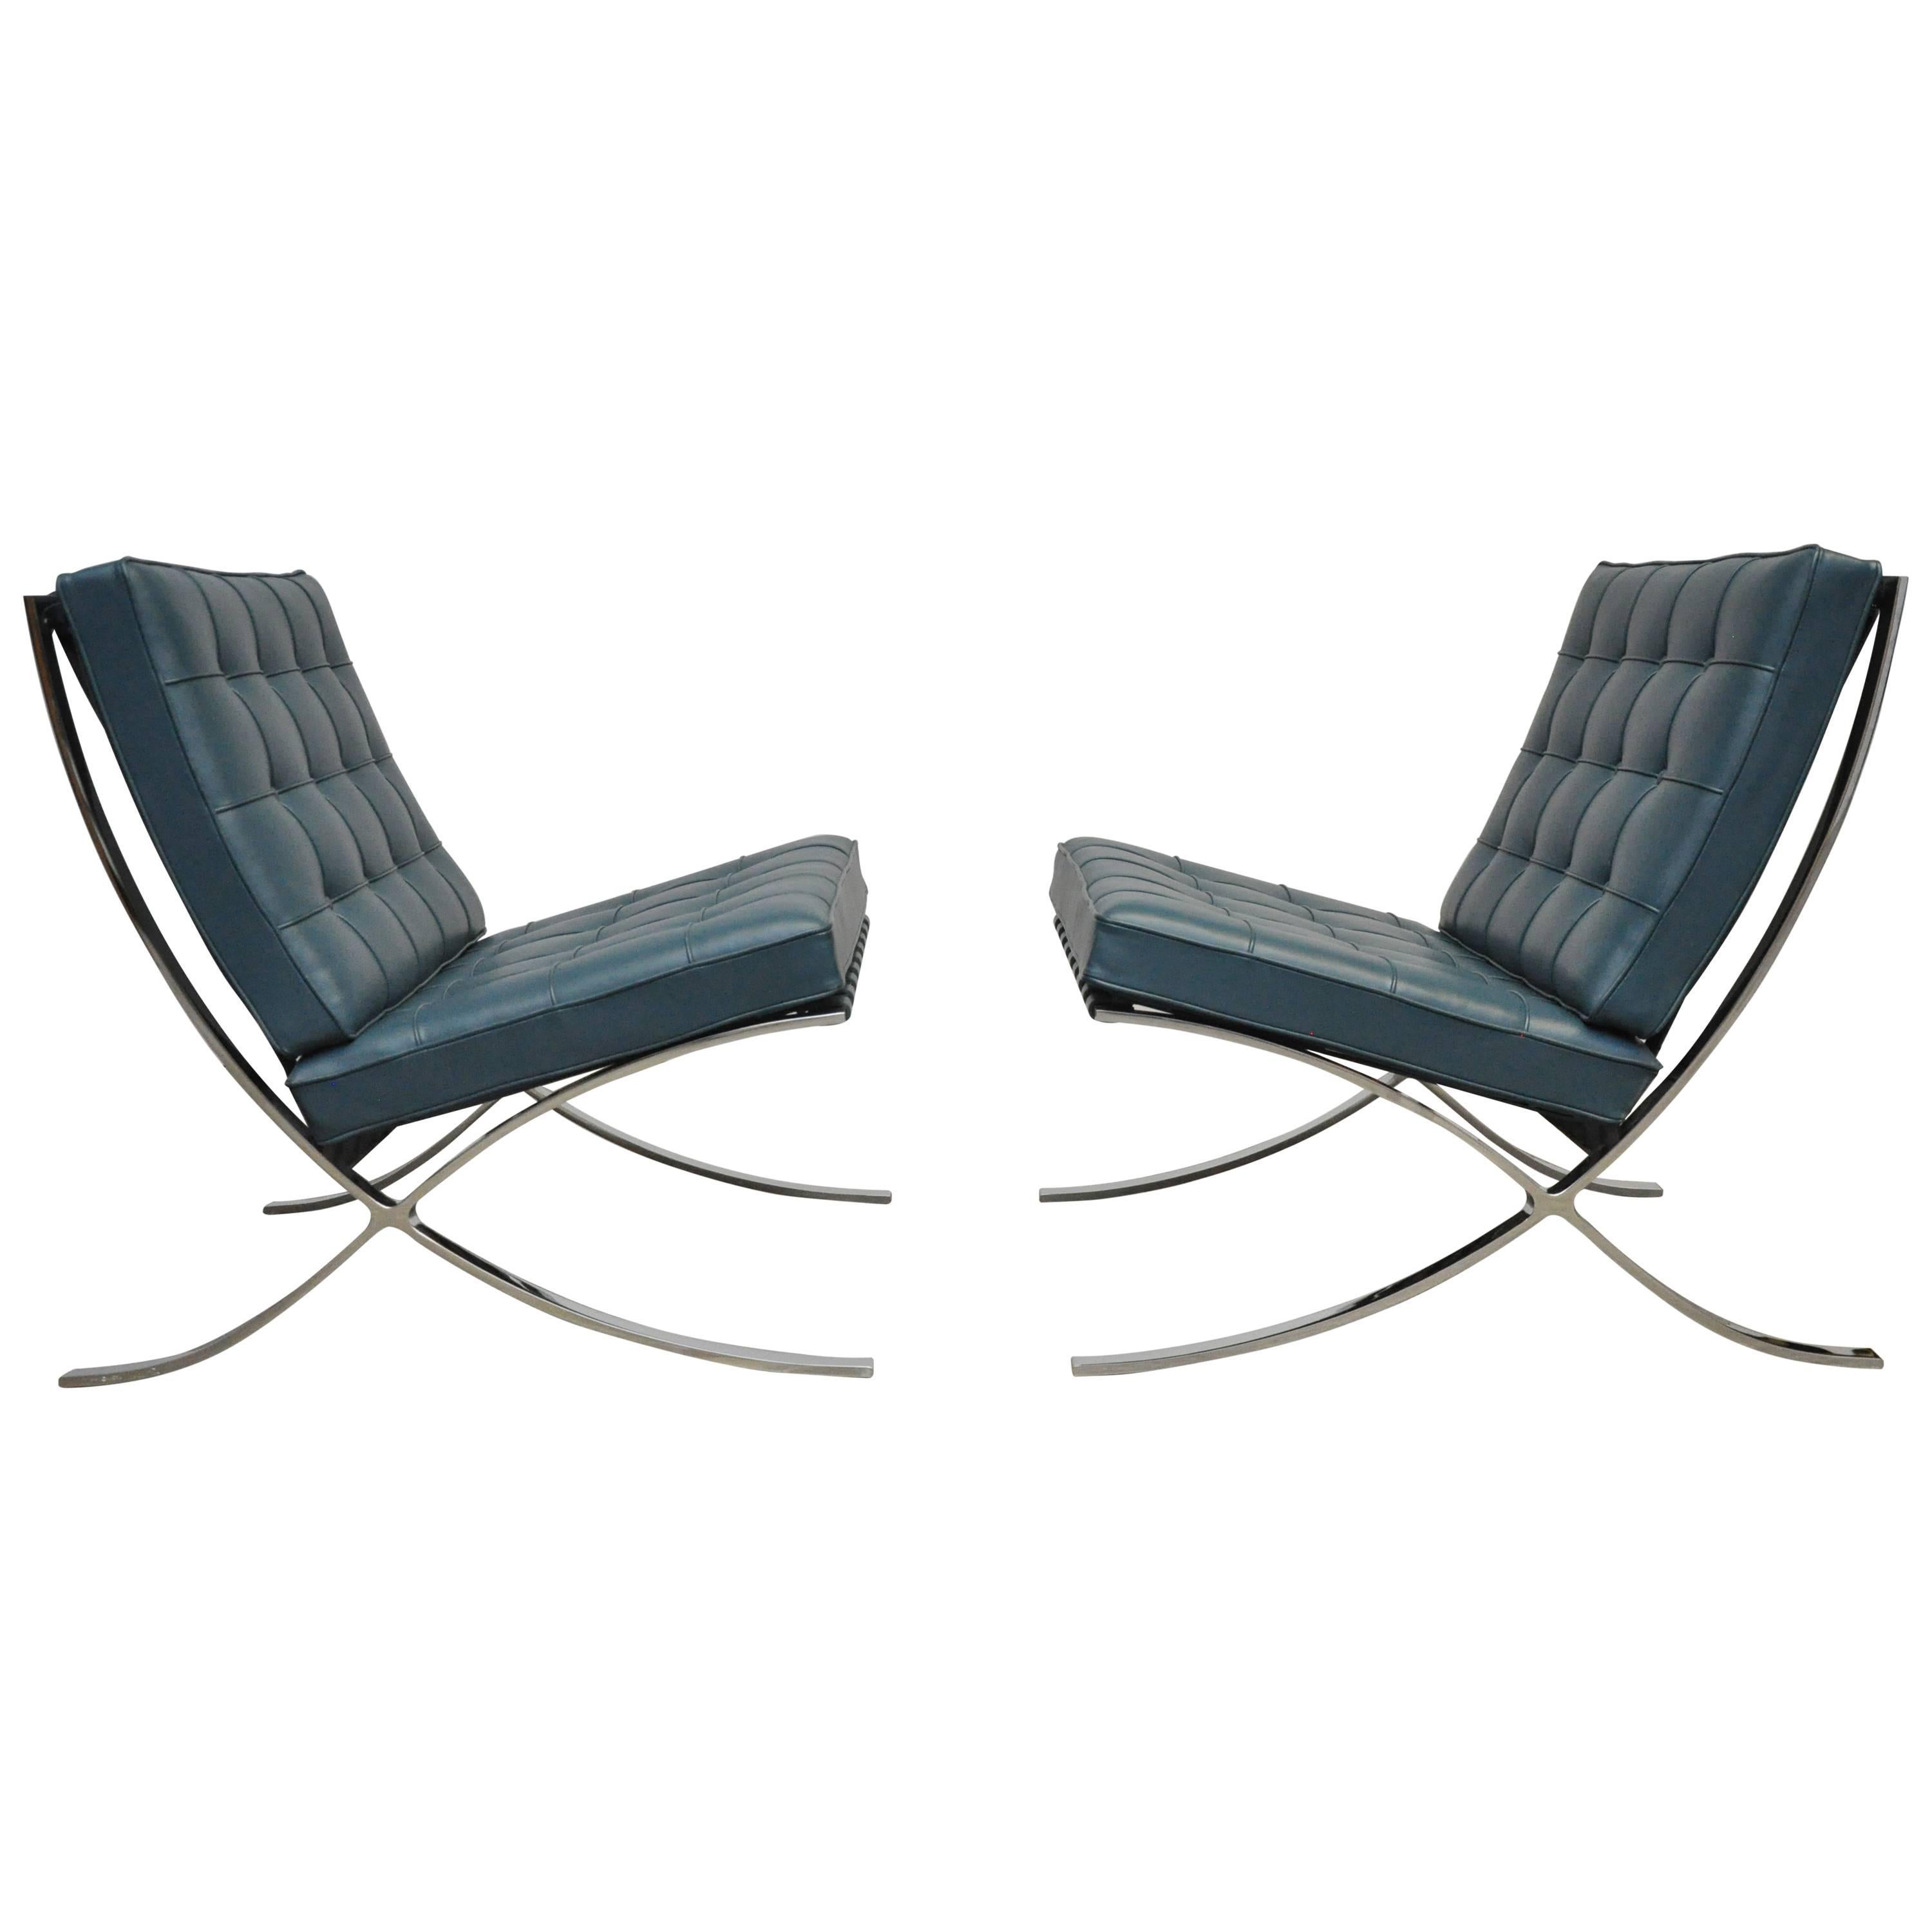 Rare Blue Barcelona Chairs by Mies Van Der Rohe for Knoll